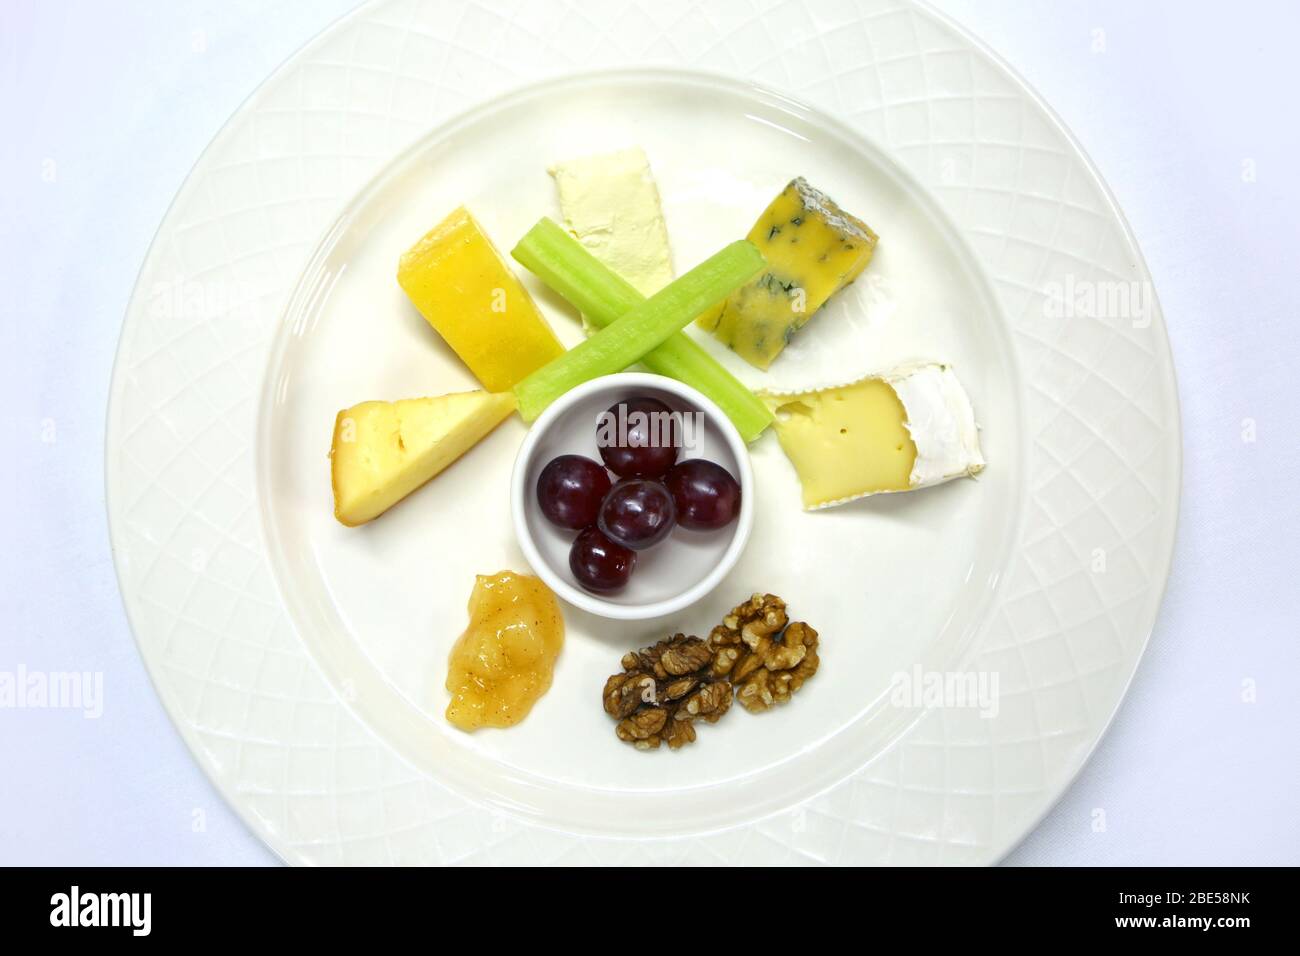 A selection of cheeses with grapes, chutney, celery & walnuts all prepared to serve as a cheese plate, on a white table cloth. Stock Photo